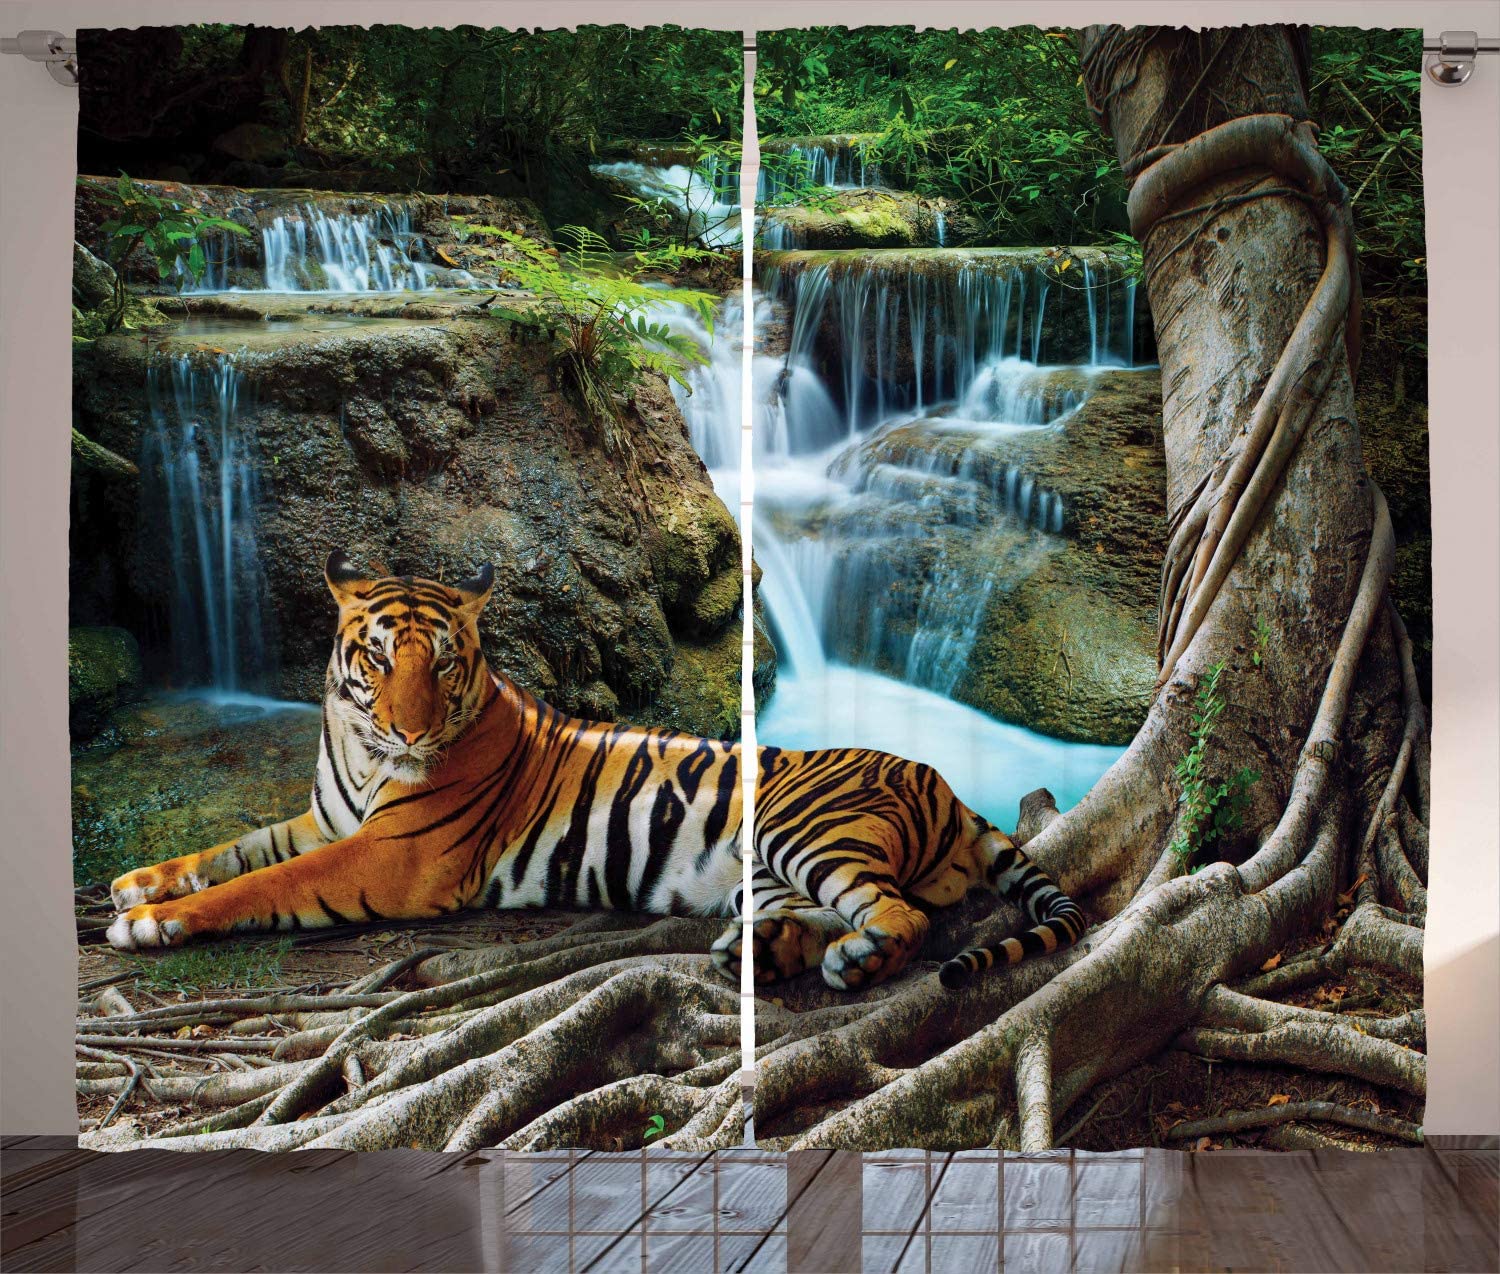 Safari Window Curtains Indochina Tiger Laying Under Banyan Tree Against Limestone Waterfall Relaxing Nature Living Room Decor